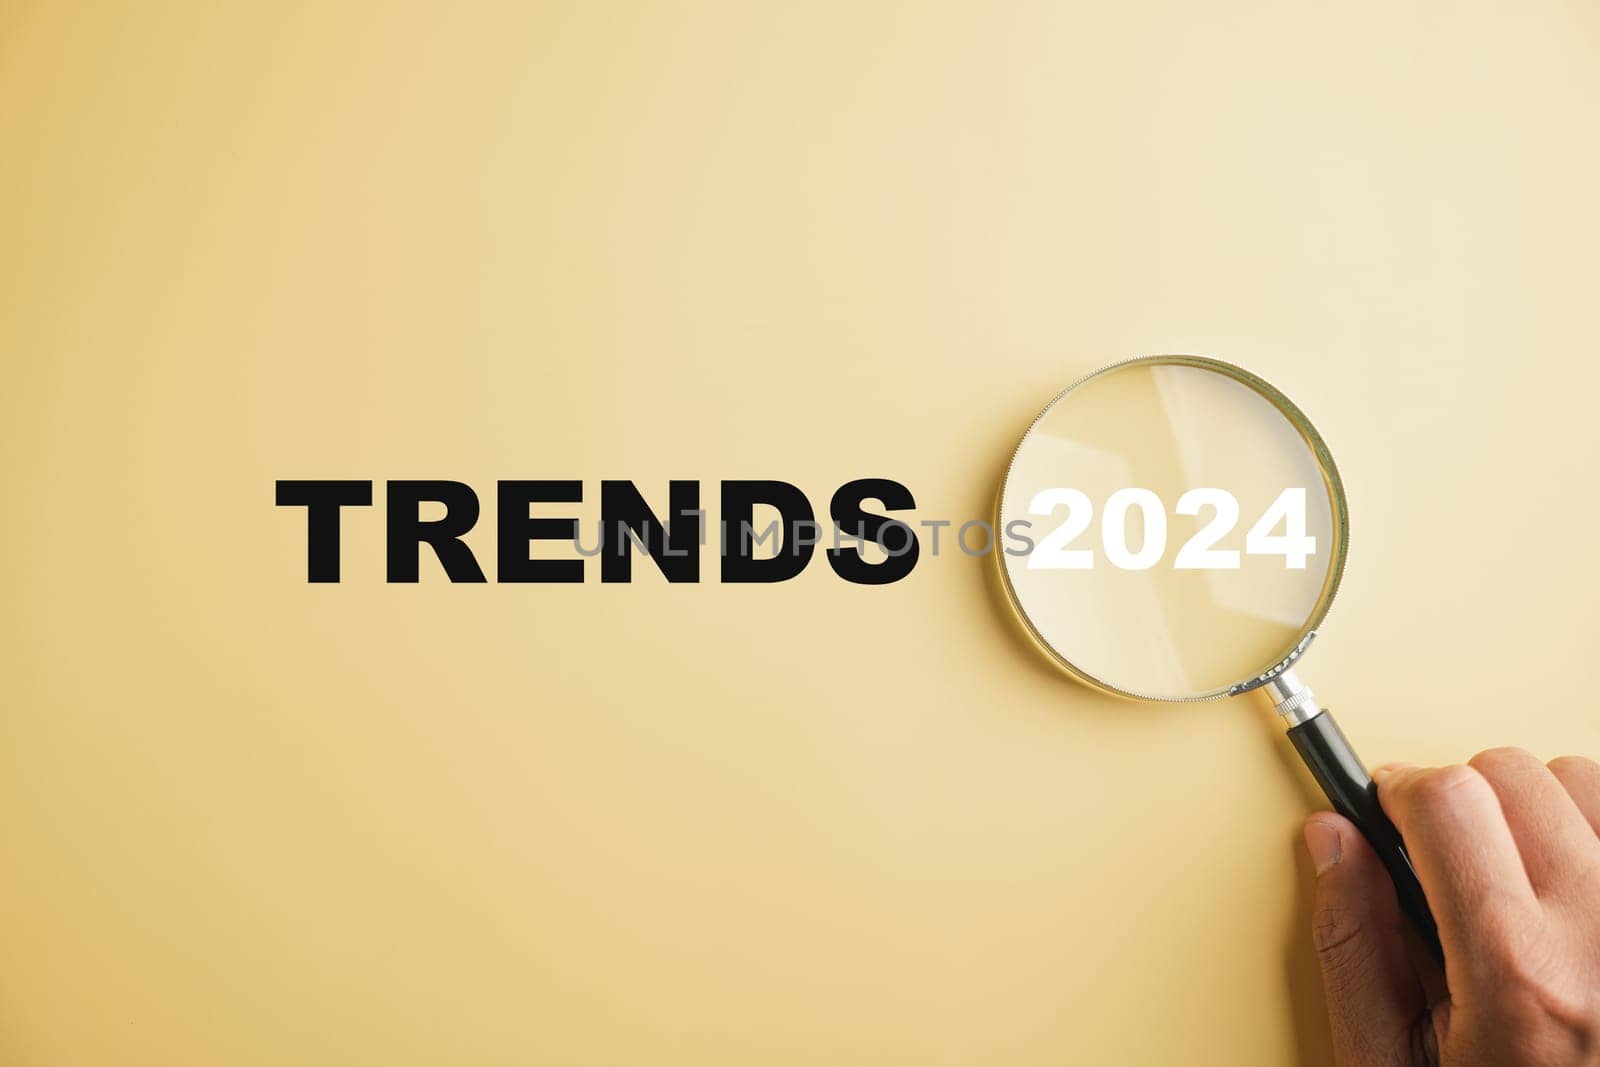 Magnifier glasses display the text New Year 2024 Trends, emphasizing the main trend of change. The image represents popular and relevant topics, new trends in business, and evaluation methods.